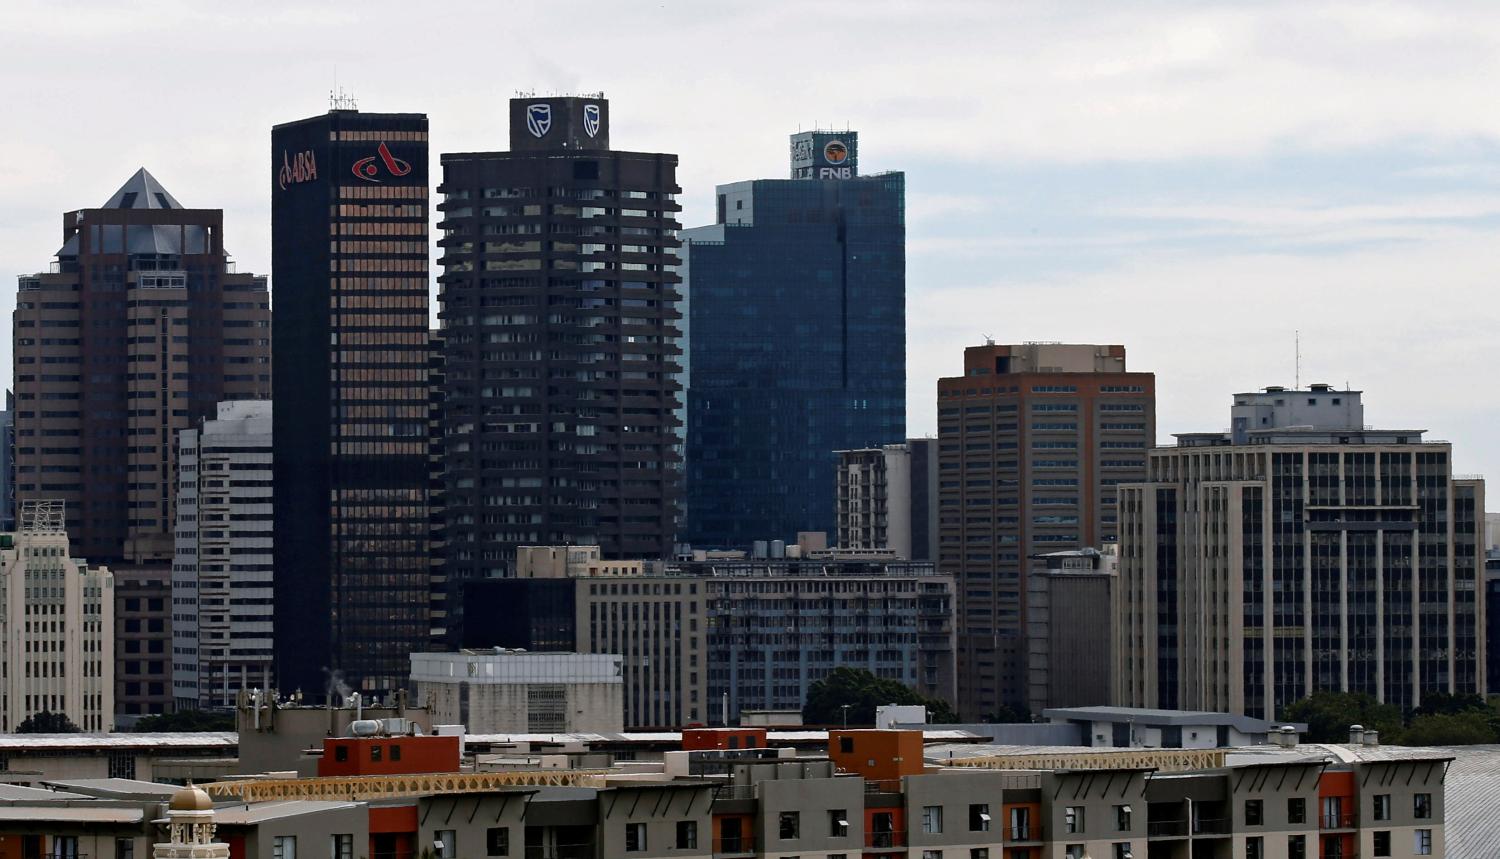 The buildings with the logos of three of South Africa's biggest banks, ABSA, Standard Bank and First National Bank (FNB) are seen against the city skyline in Cape Town, South Africa, August 30, 2017. Picture taken August 30, 2017. REUTERS/Mike Hutchings - RC199A8F64C0